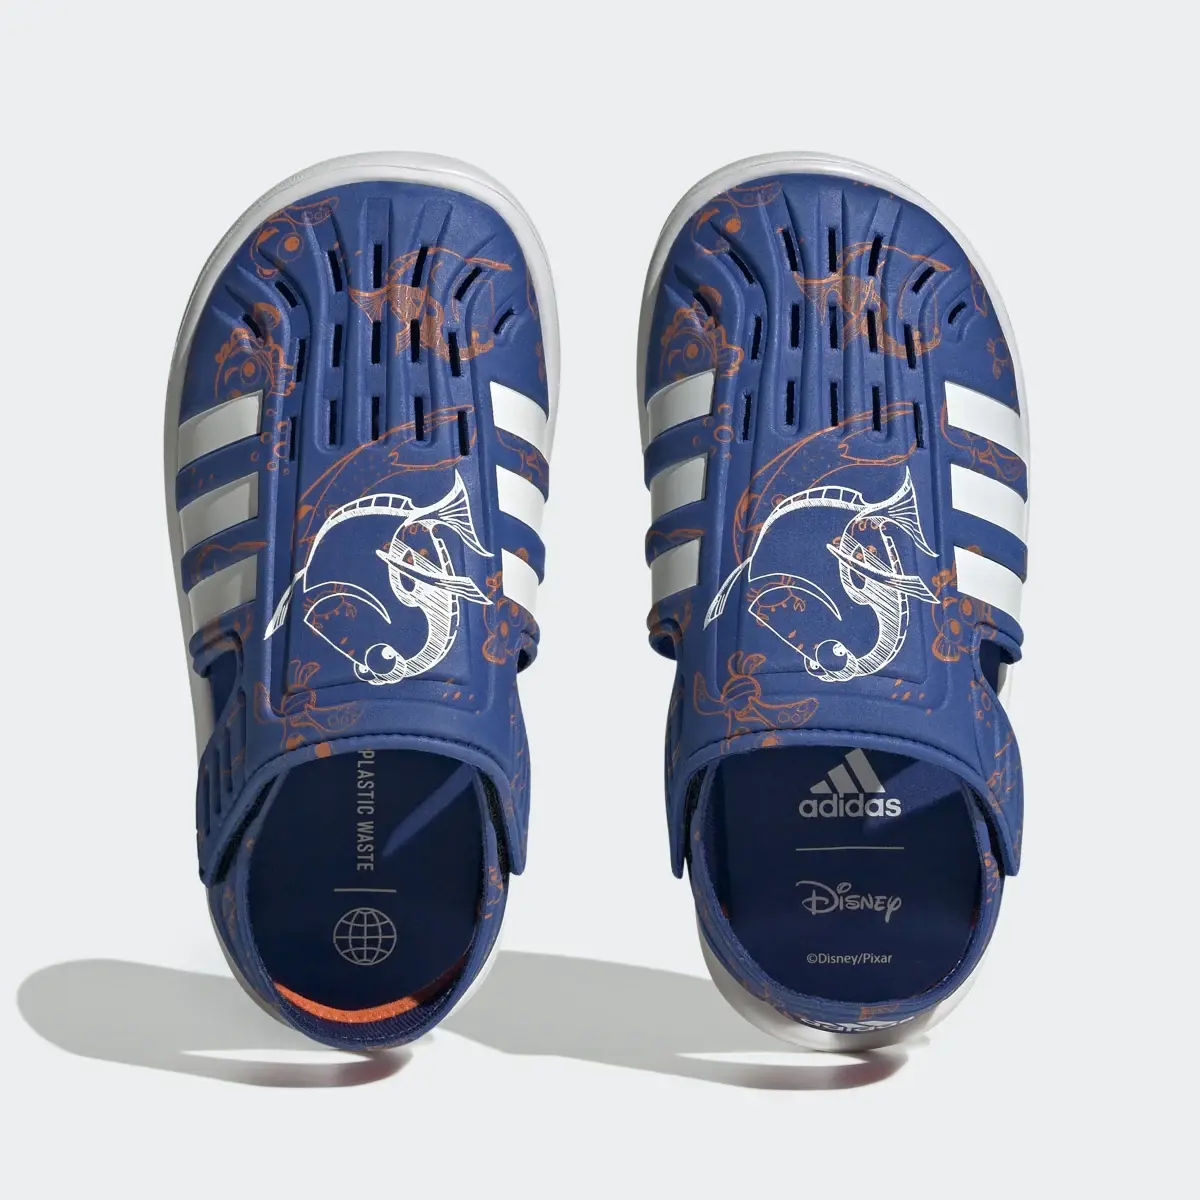 Adidas x Disney Finding Nemo and Dory Closed Toe Summer Sandals. 3